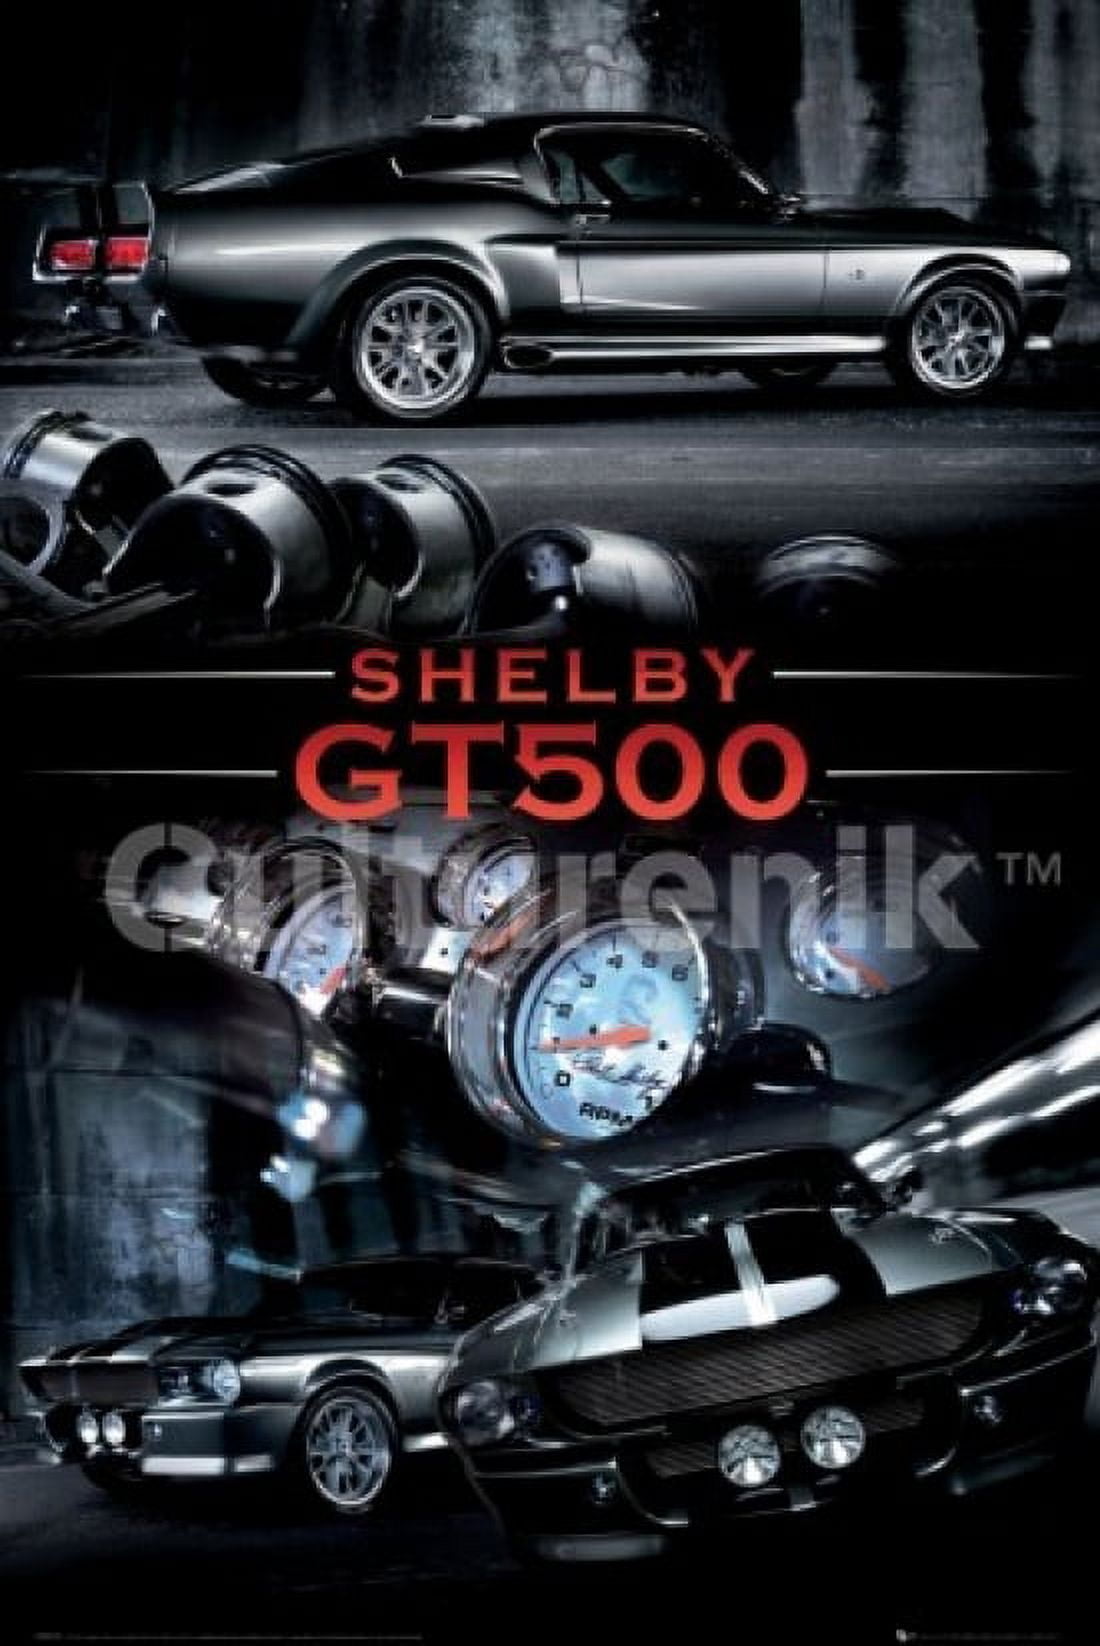 Ford - X 24) Shelby Poster GT500 Mustang (36